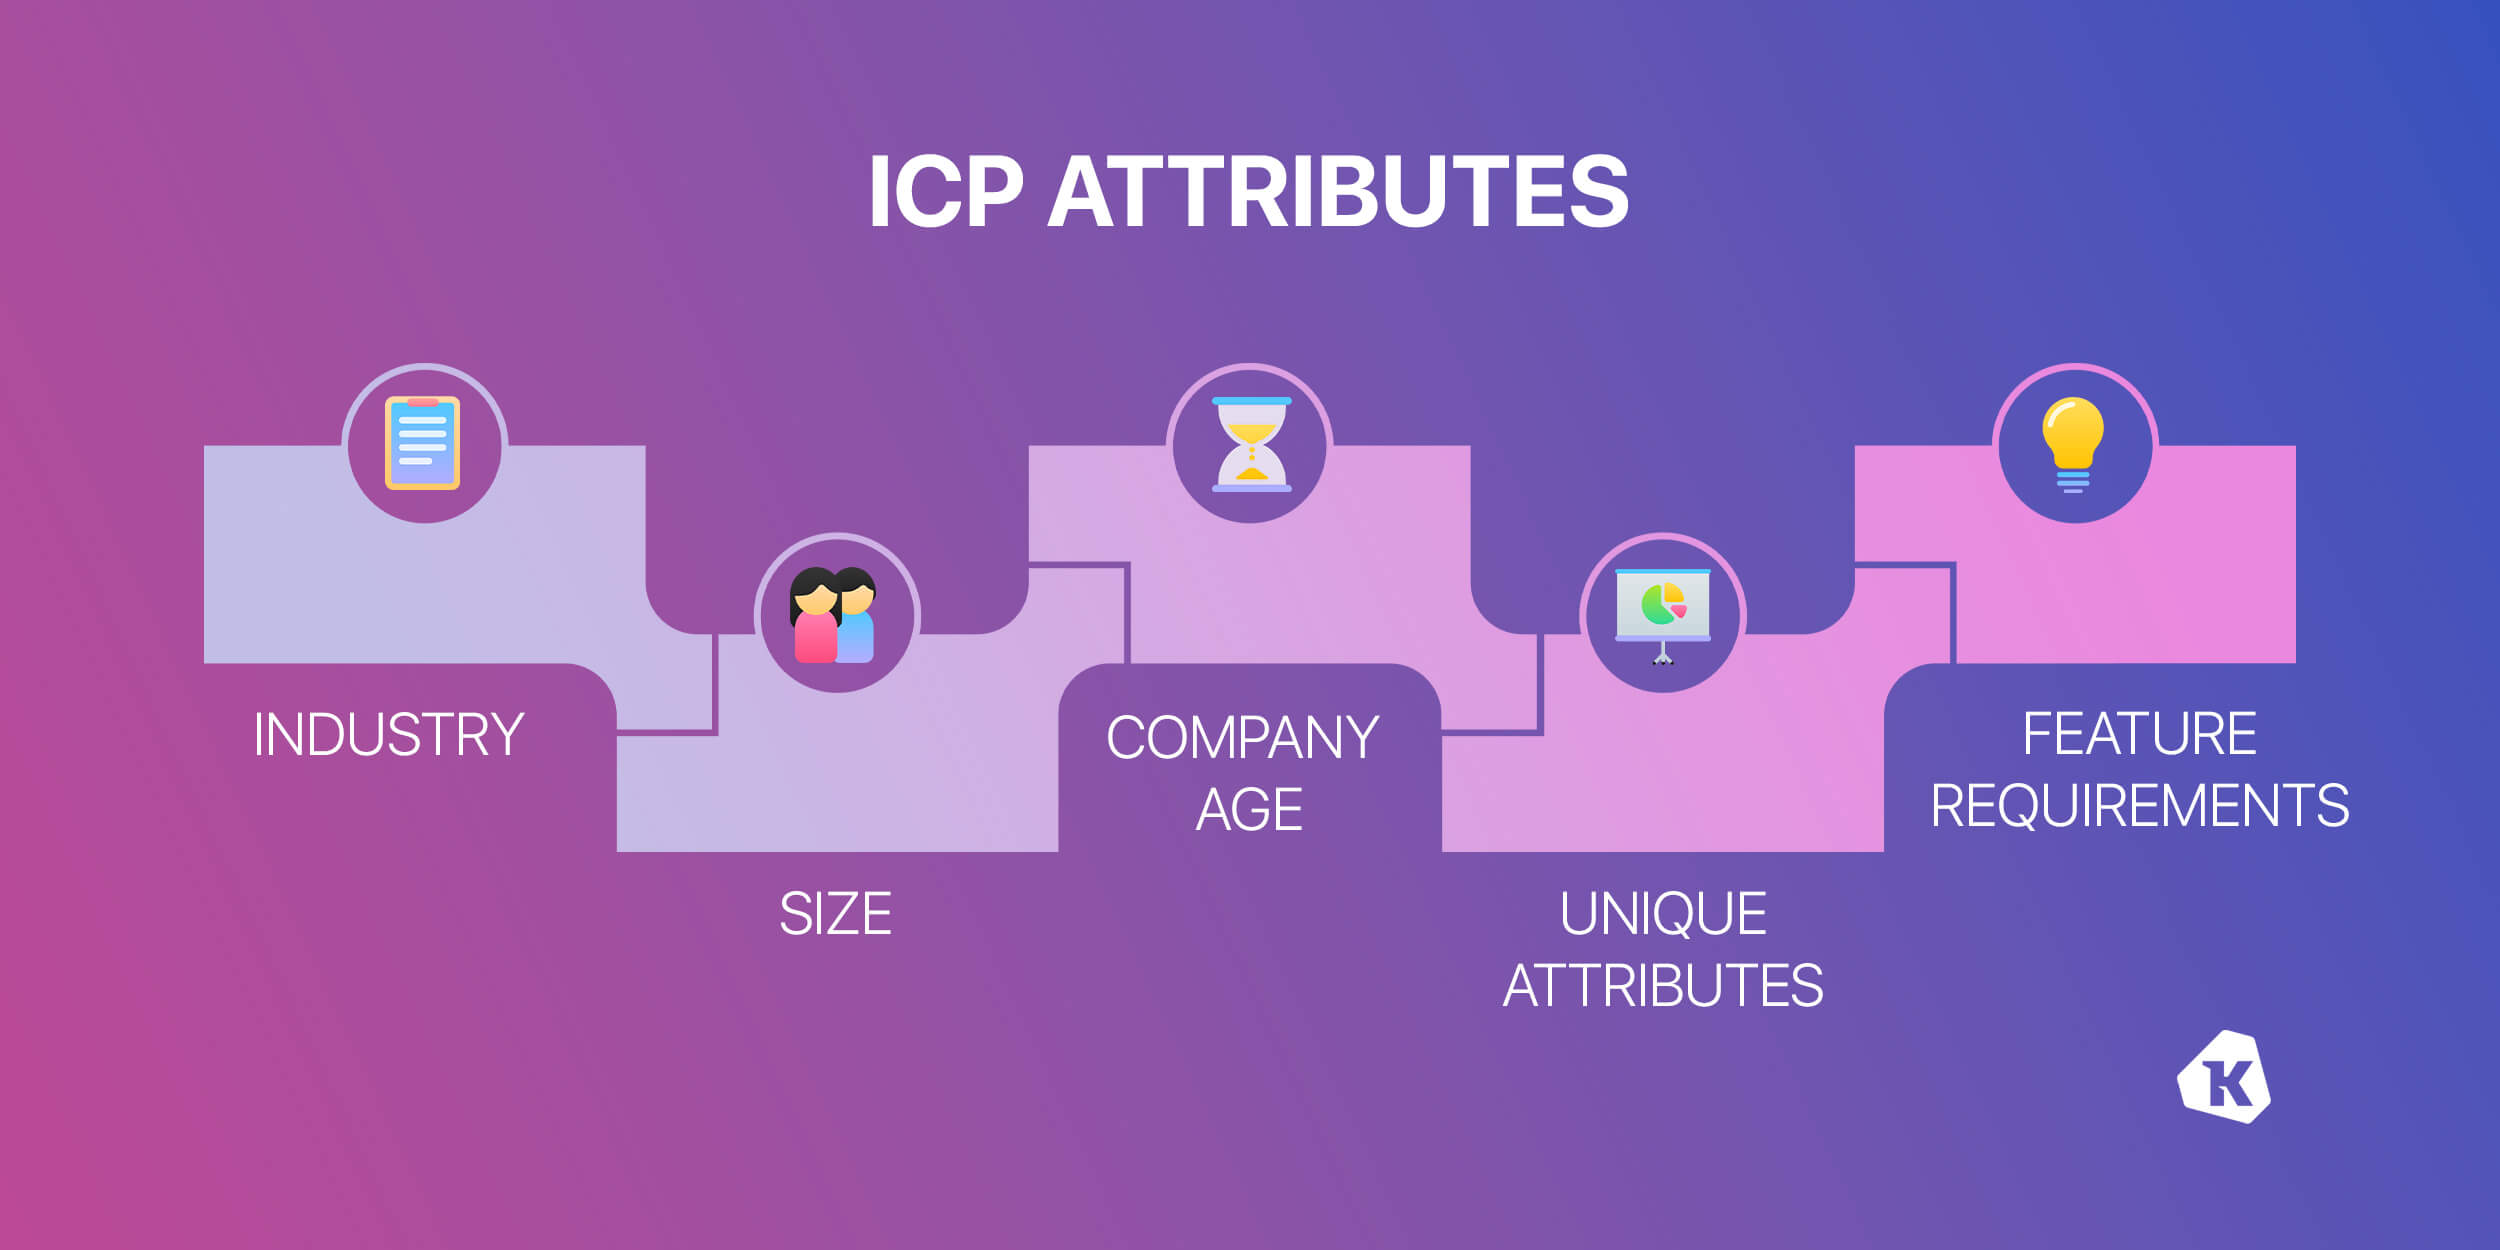 a graphic of different potential attributes for an ICP, including age, company size, and industry